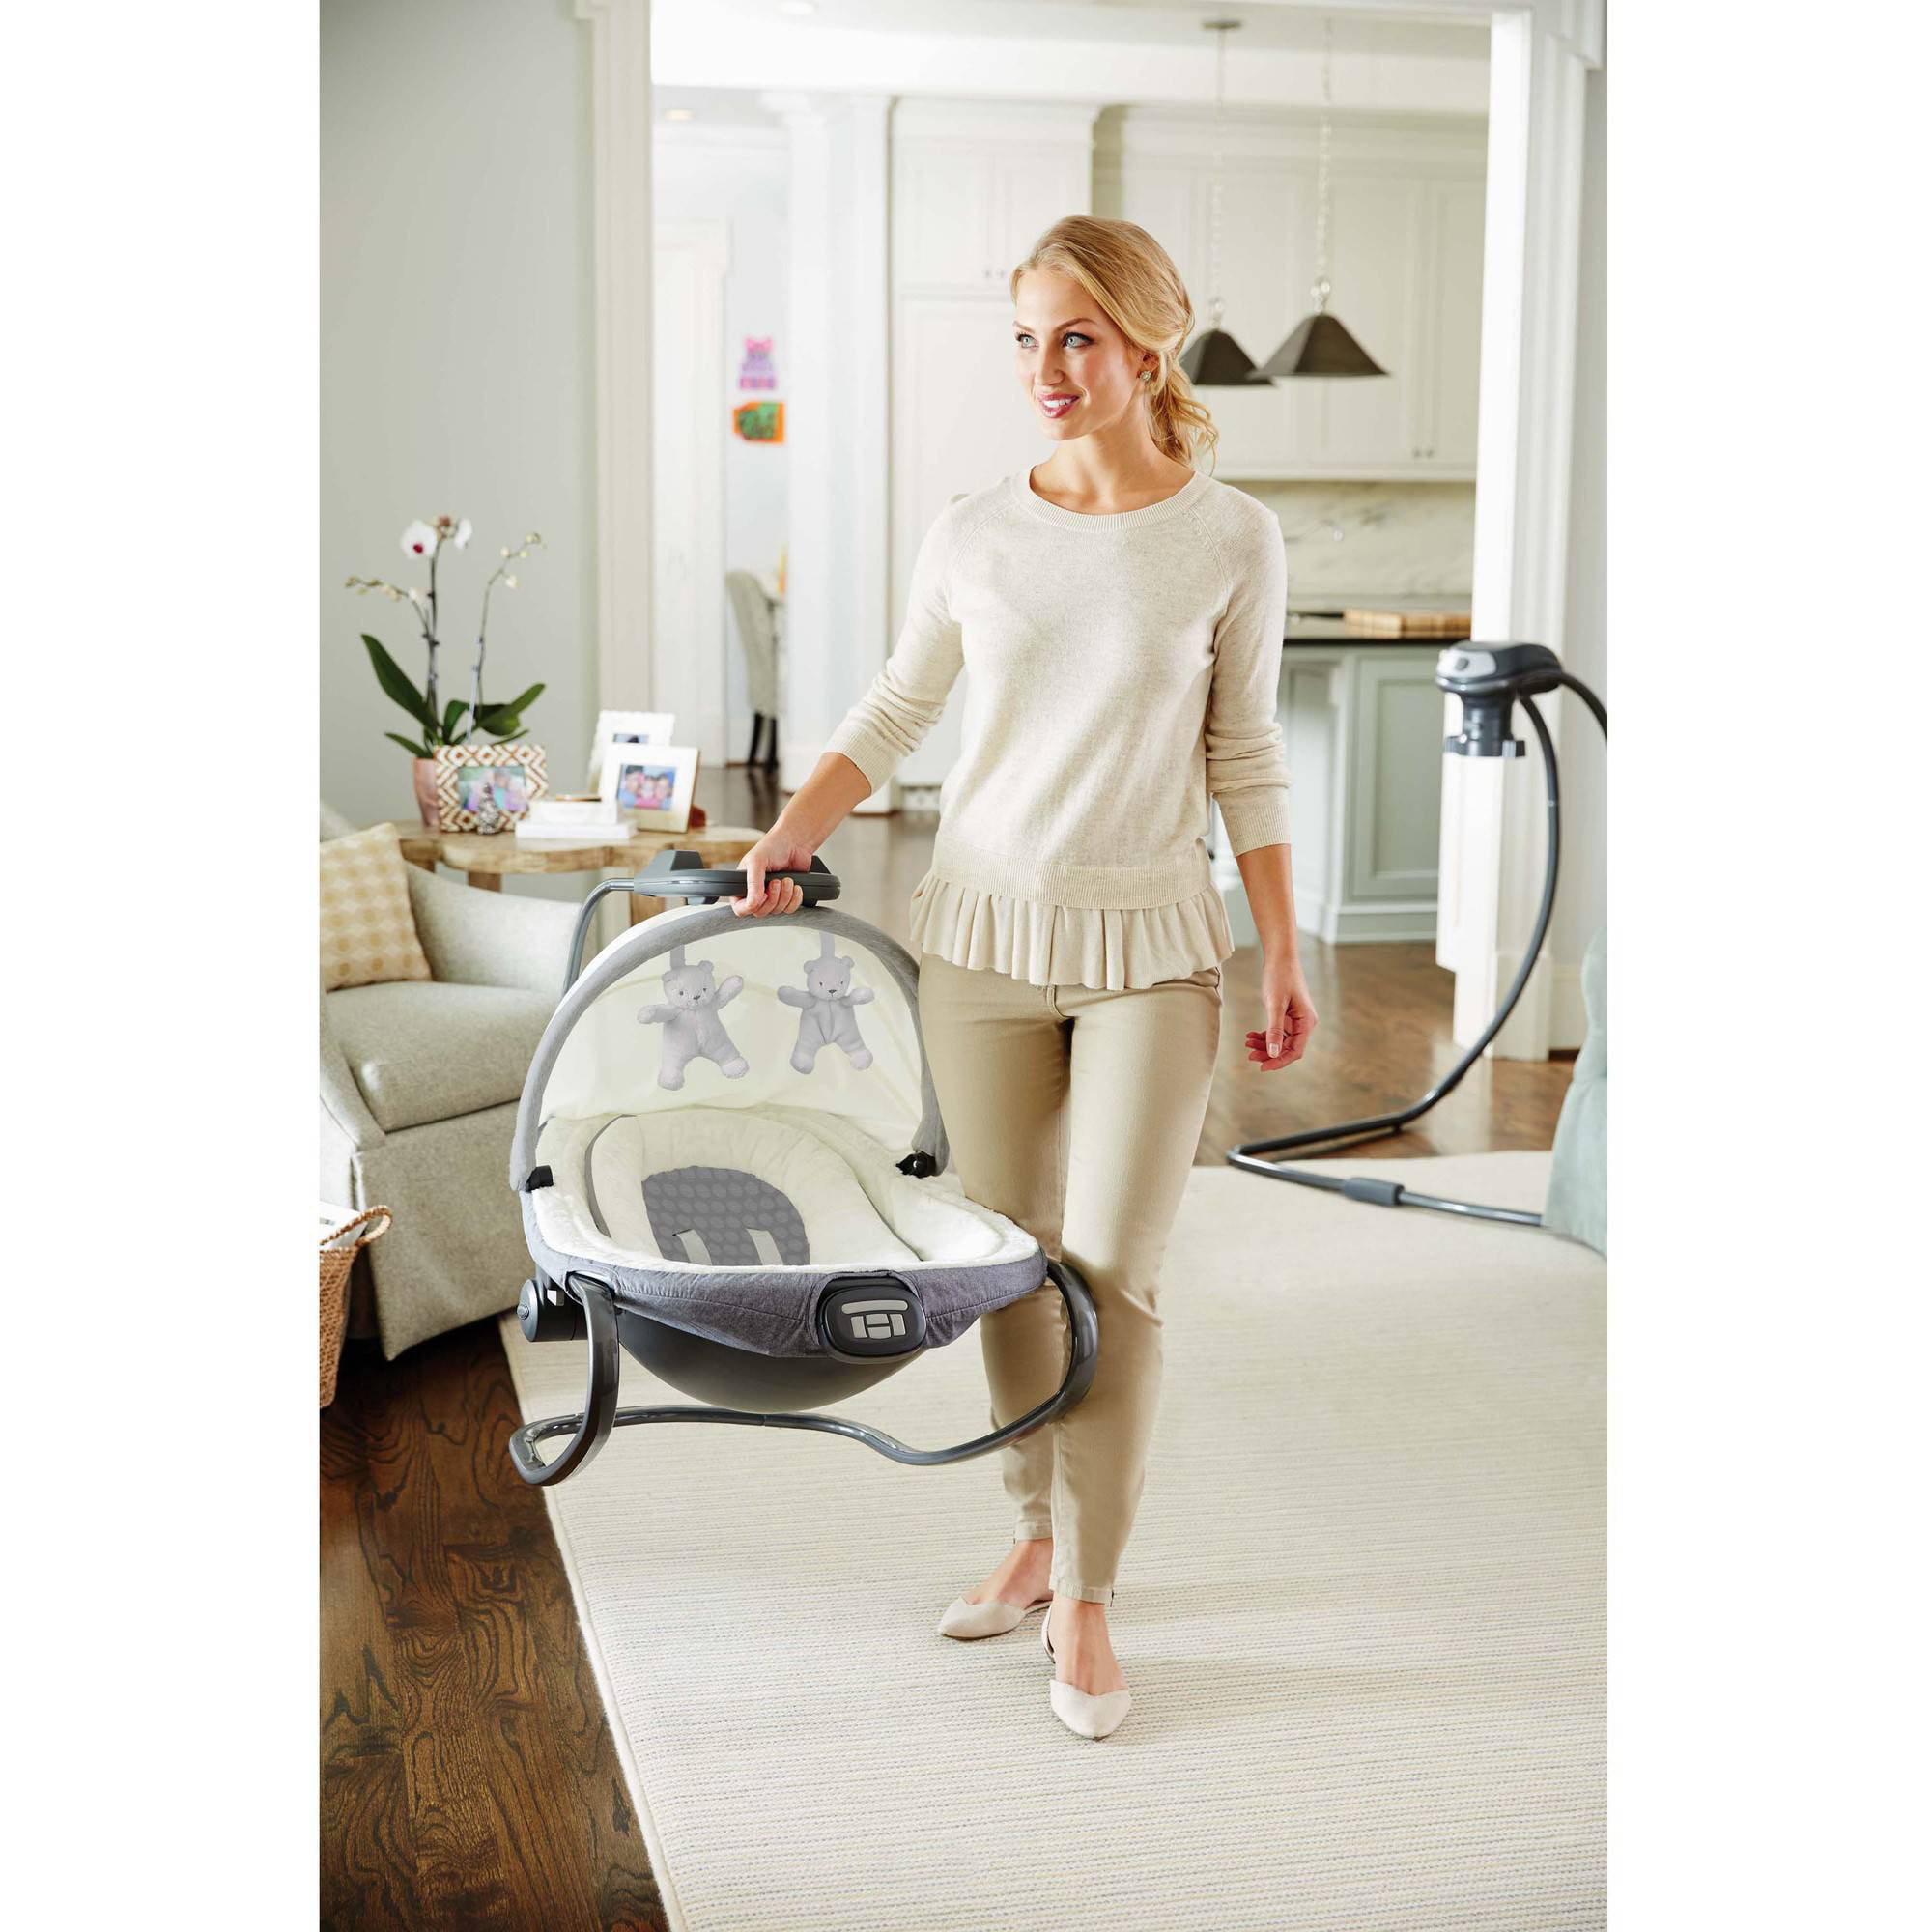 graco duet oasis with soothe surround swing